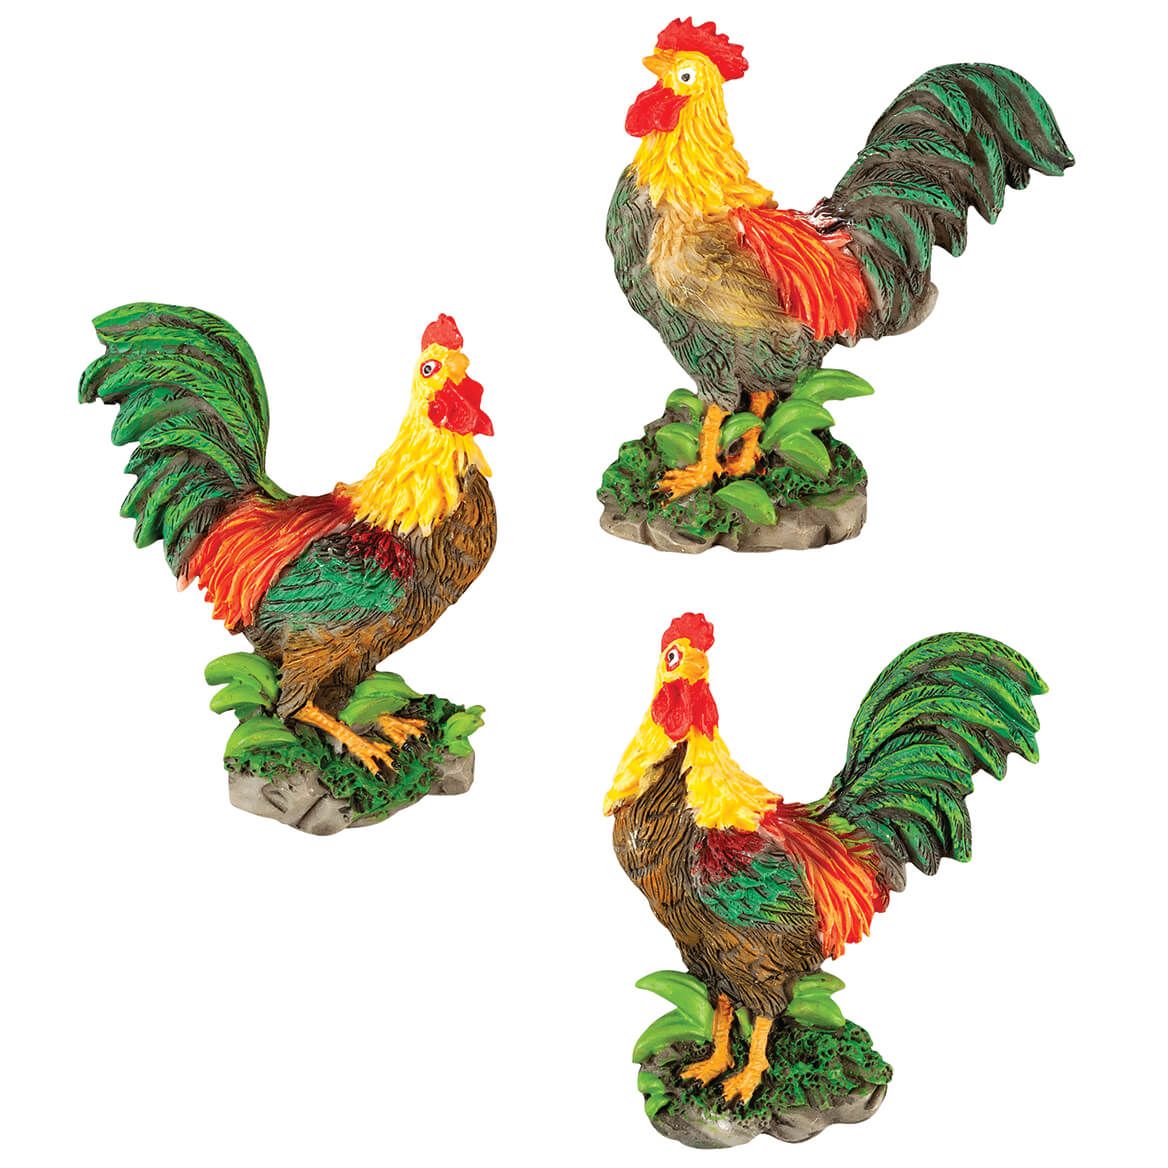 Rooster Kitchen Magnets, Set of 3 by Chefs Pride + '-' + 370748